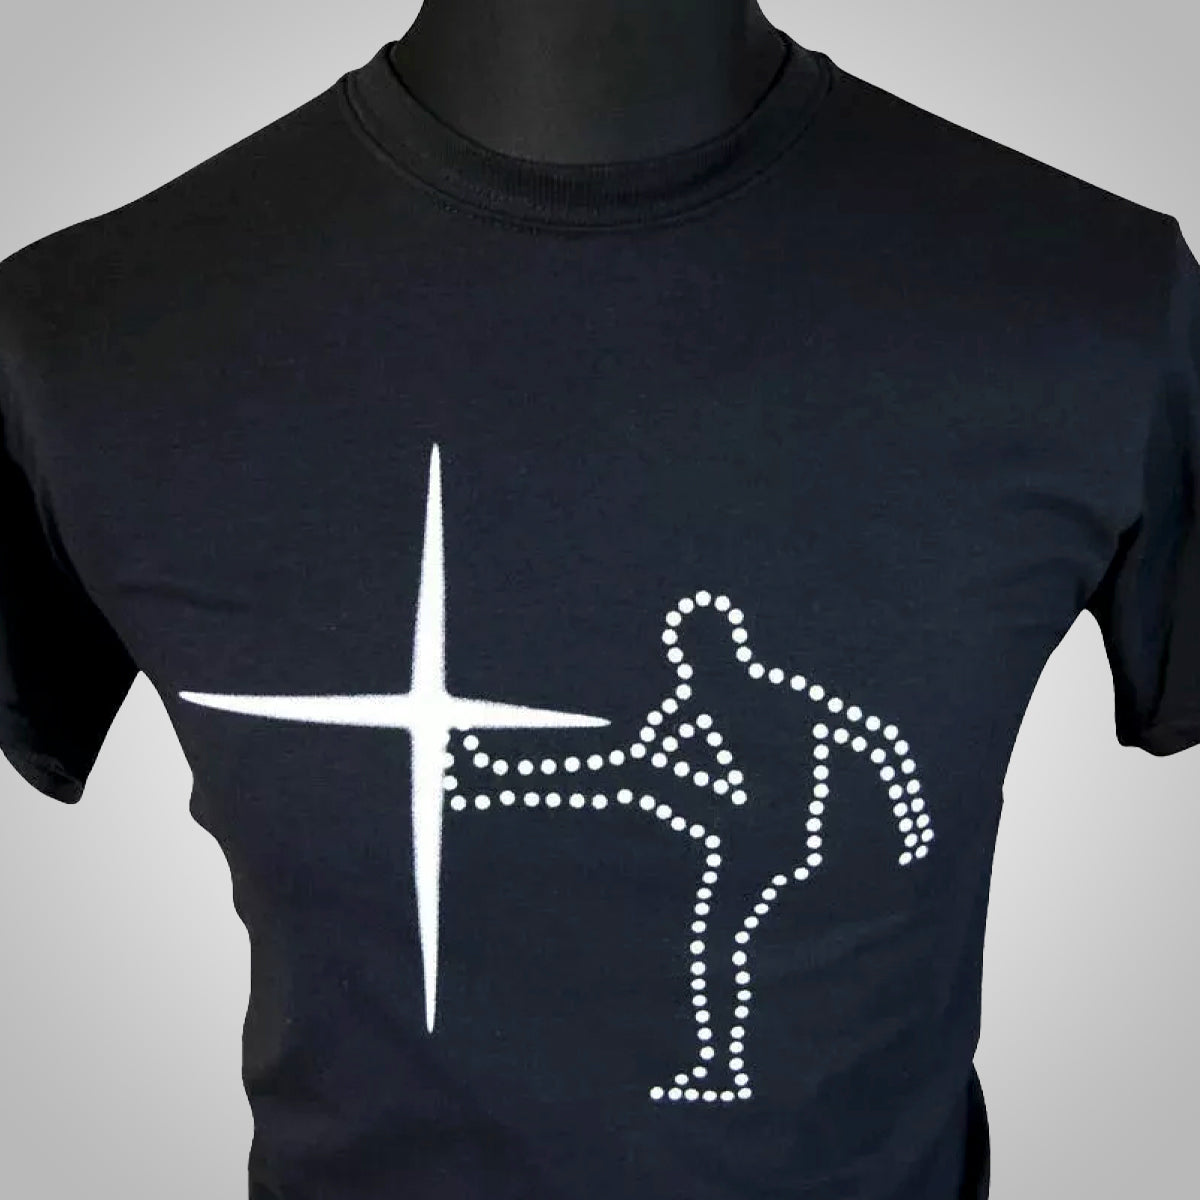 The Old Grey Whistle Test T Shirt